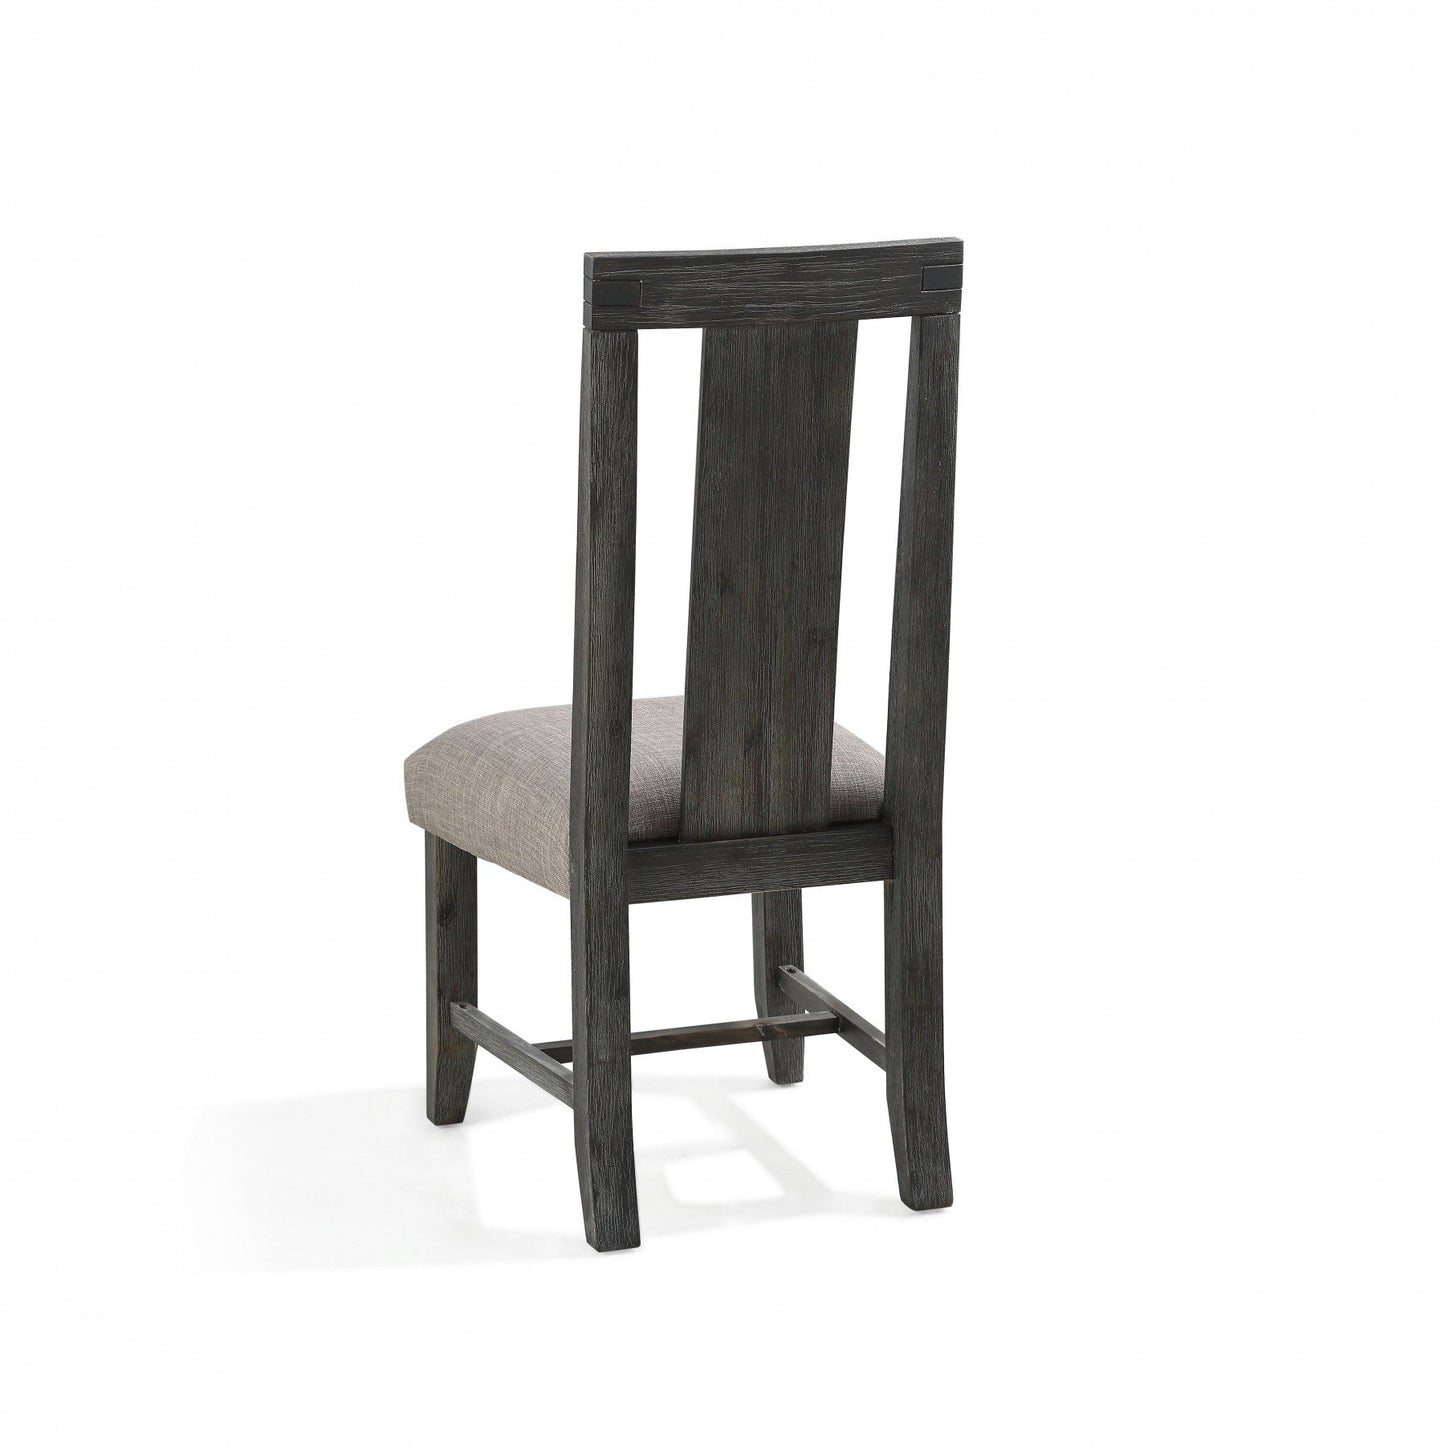 Modus Meadow 2 Uphostered Panel-Back Chair